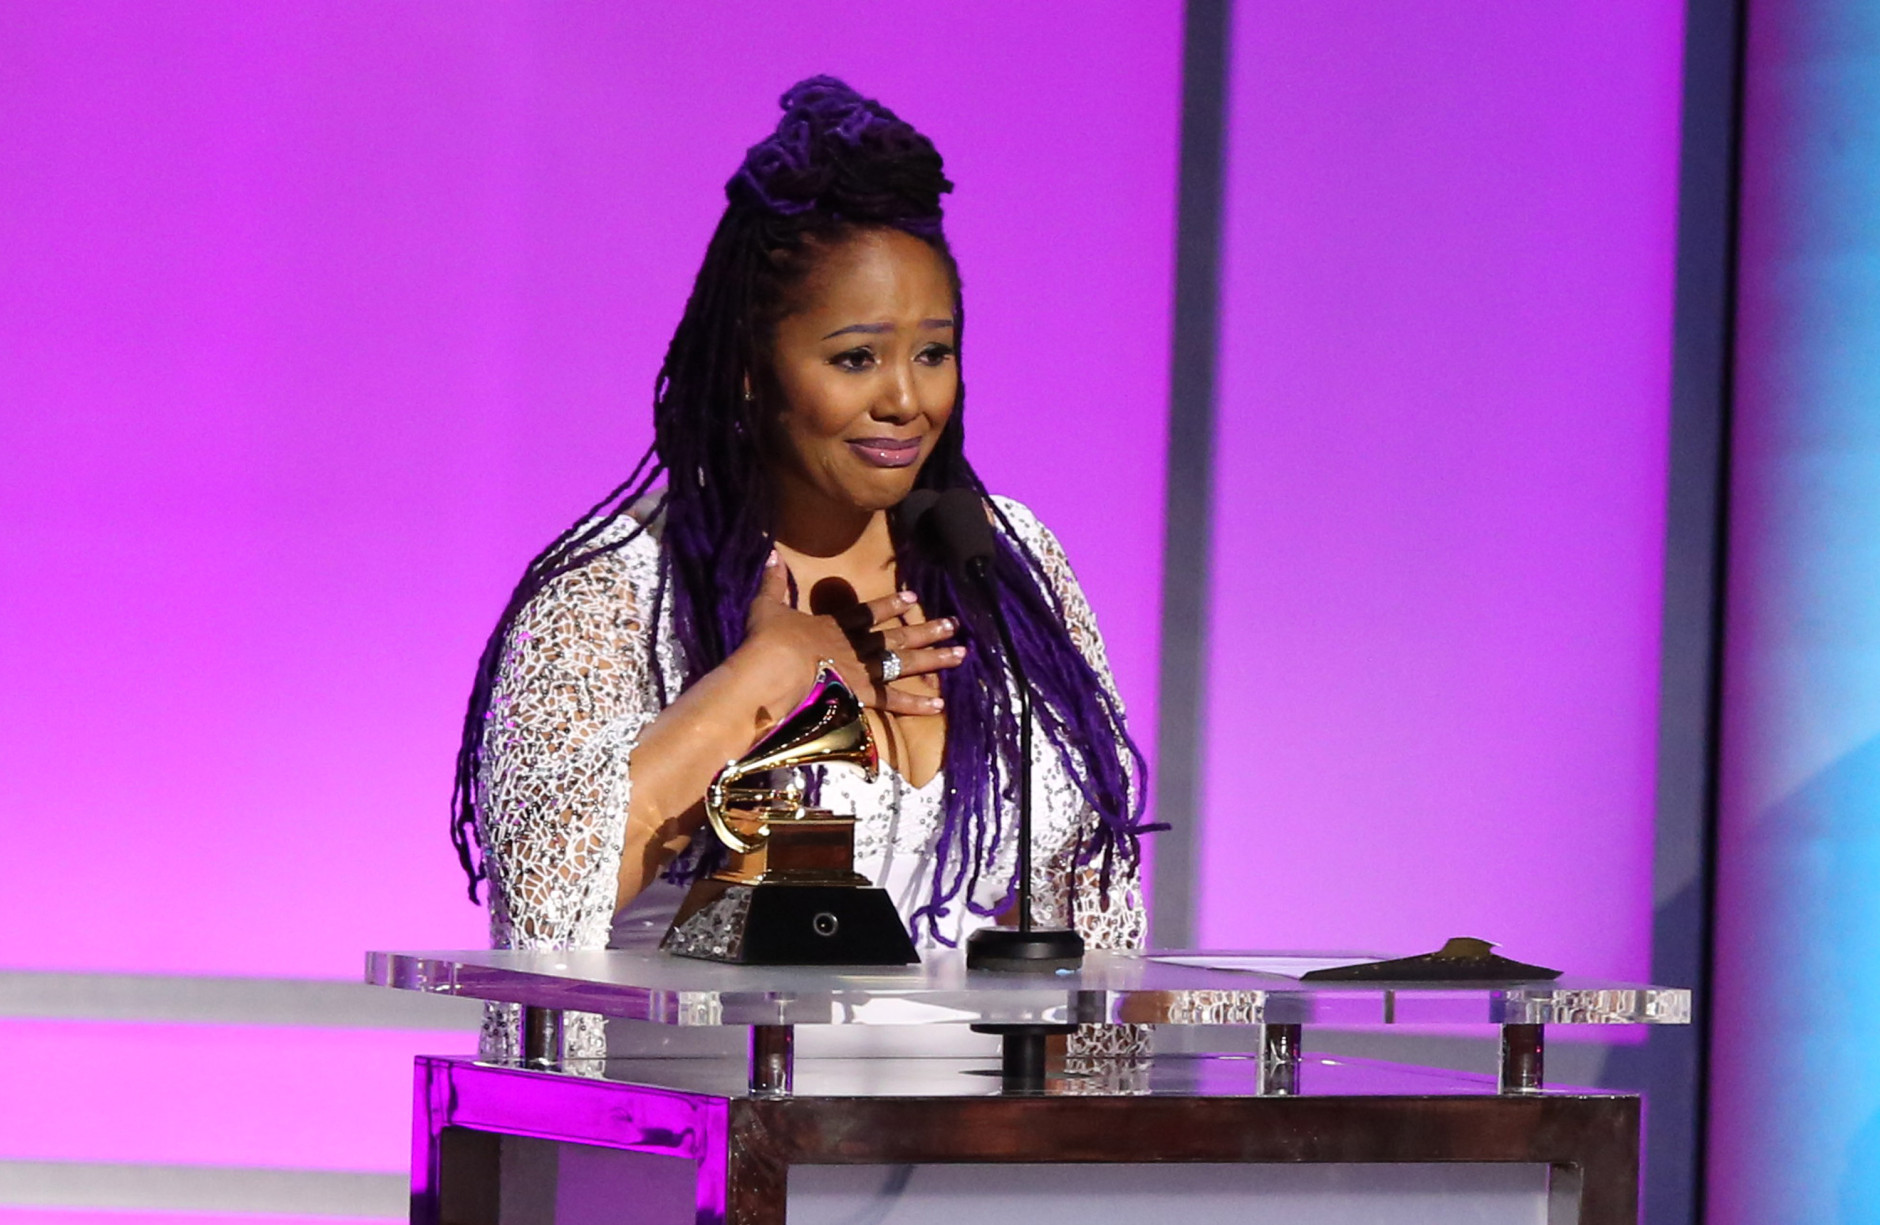 Lalah Hathaway accepts the award for best traditional R&amp;B performance for Little Ghetto Boy at the 58th annual Grammy Awards on Monday, Feb. 15, 2016, in Los Angeles. (Photo by Matt Sayles/Invision/AP)